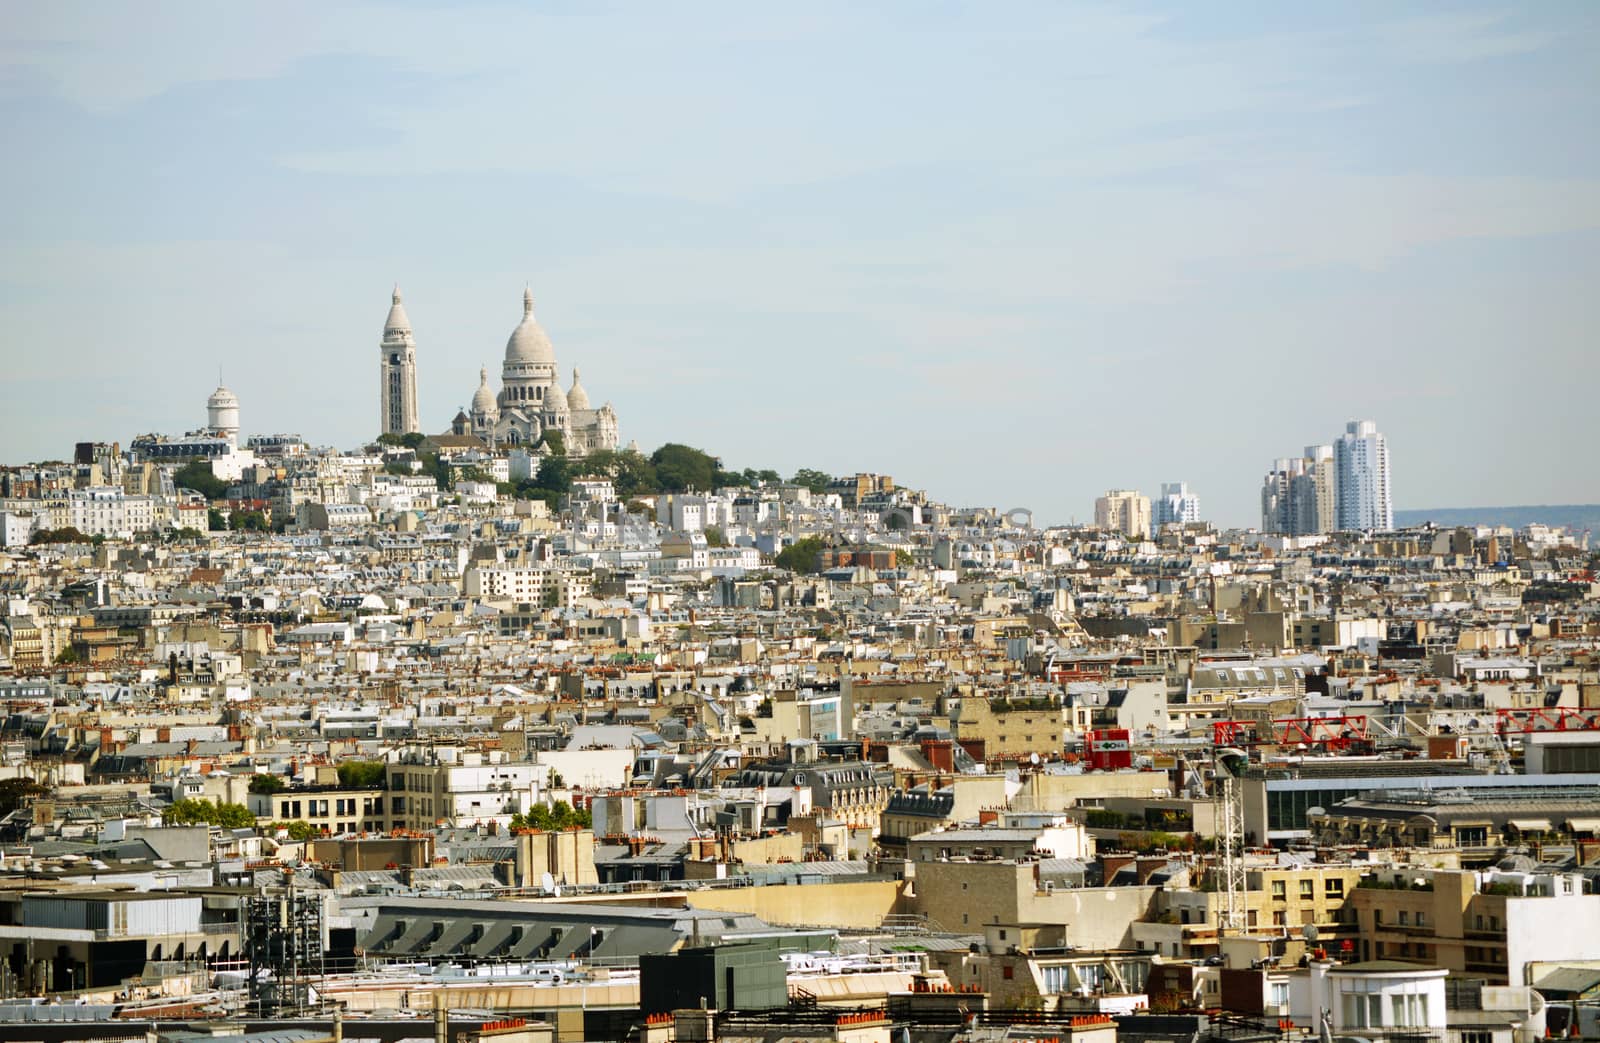 Sacre Coeur basilica and Chateau d'eau Montmartre on the hill by sarahdoow